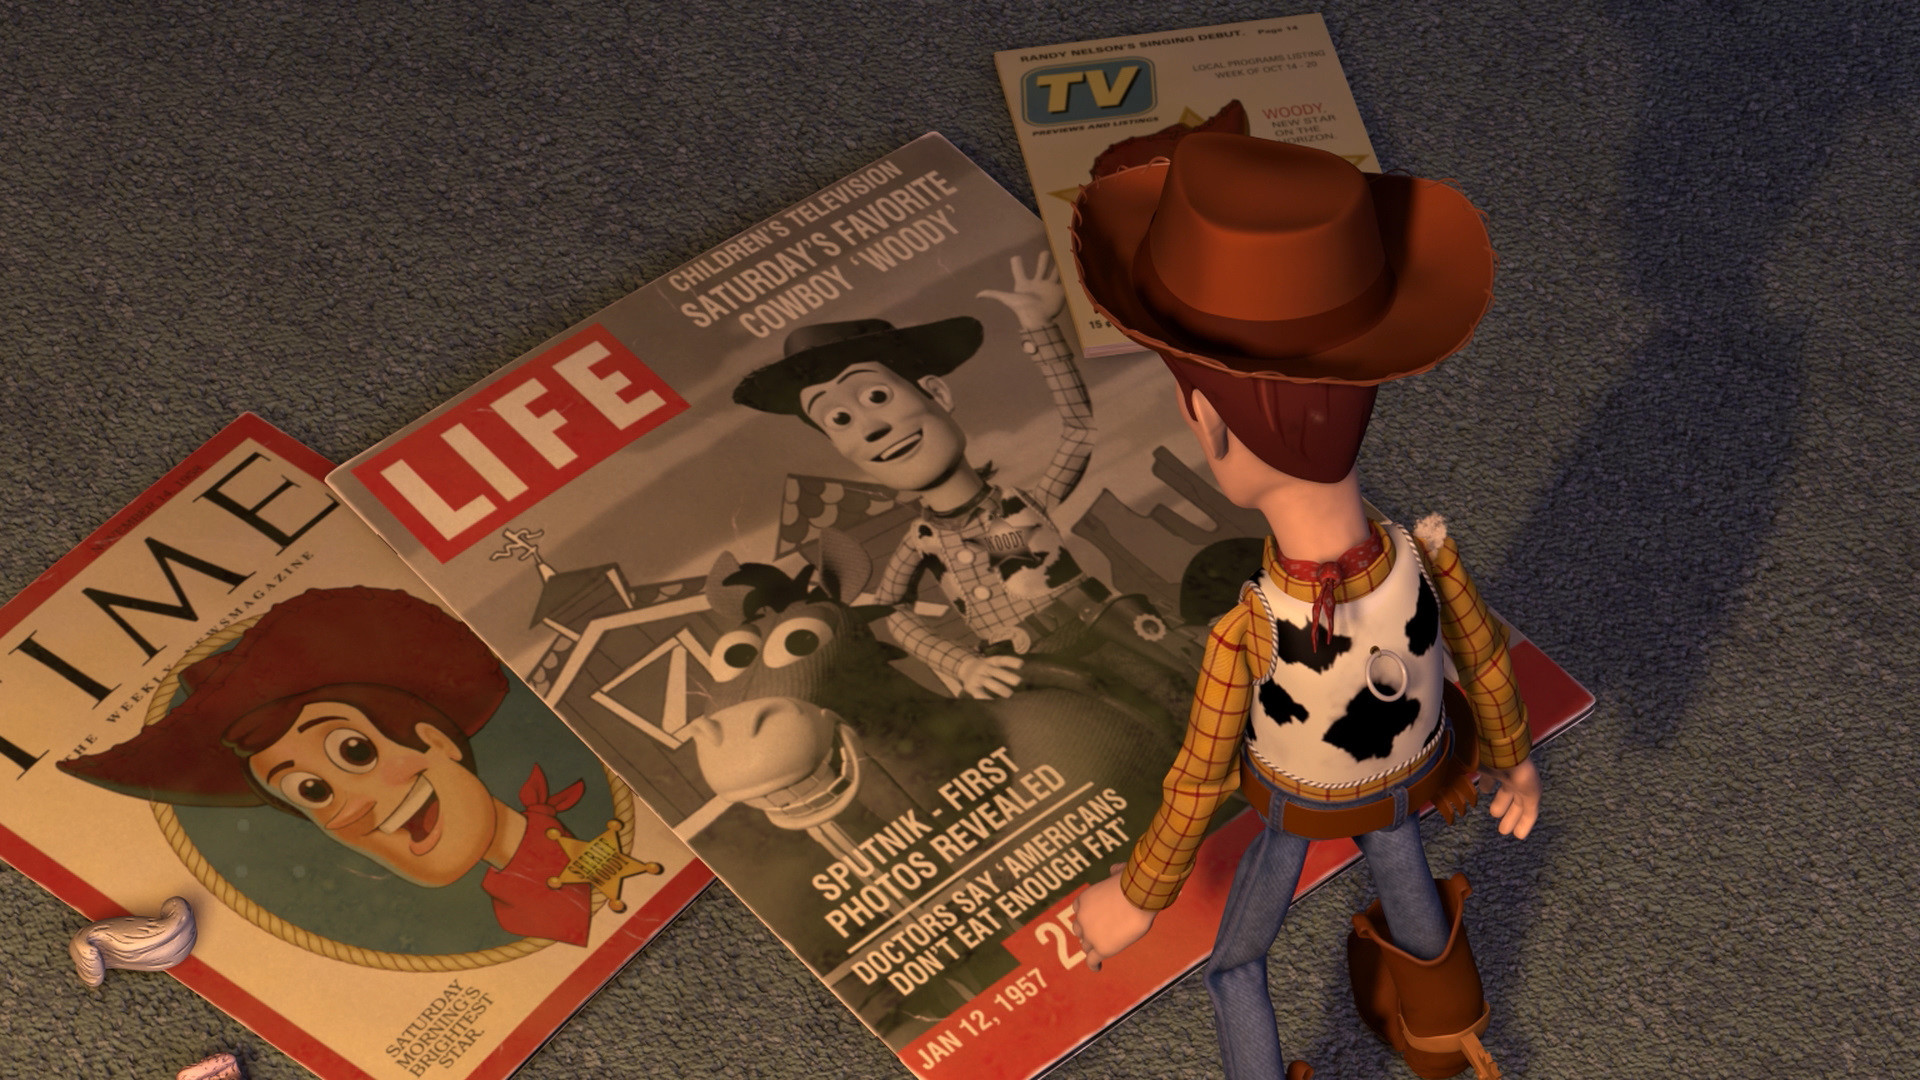 1920x1080 ... Toy Story 4 Wallpapers, High Resolution Toy Story 4 Wallpapers for .